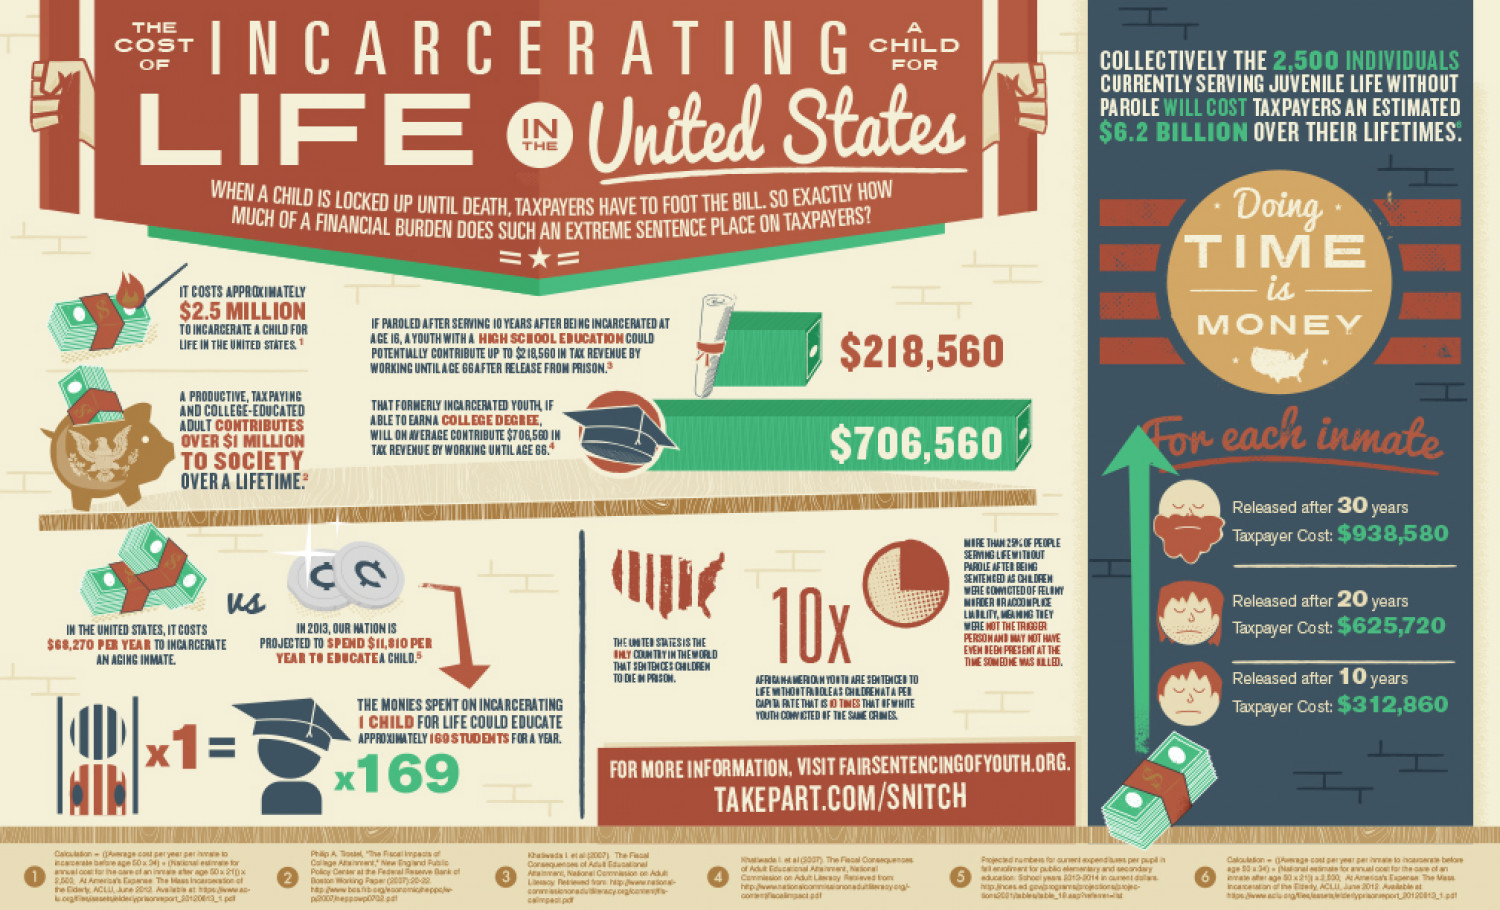 The Cost of Incarcerating a Child for Life in the United States Infographic